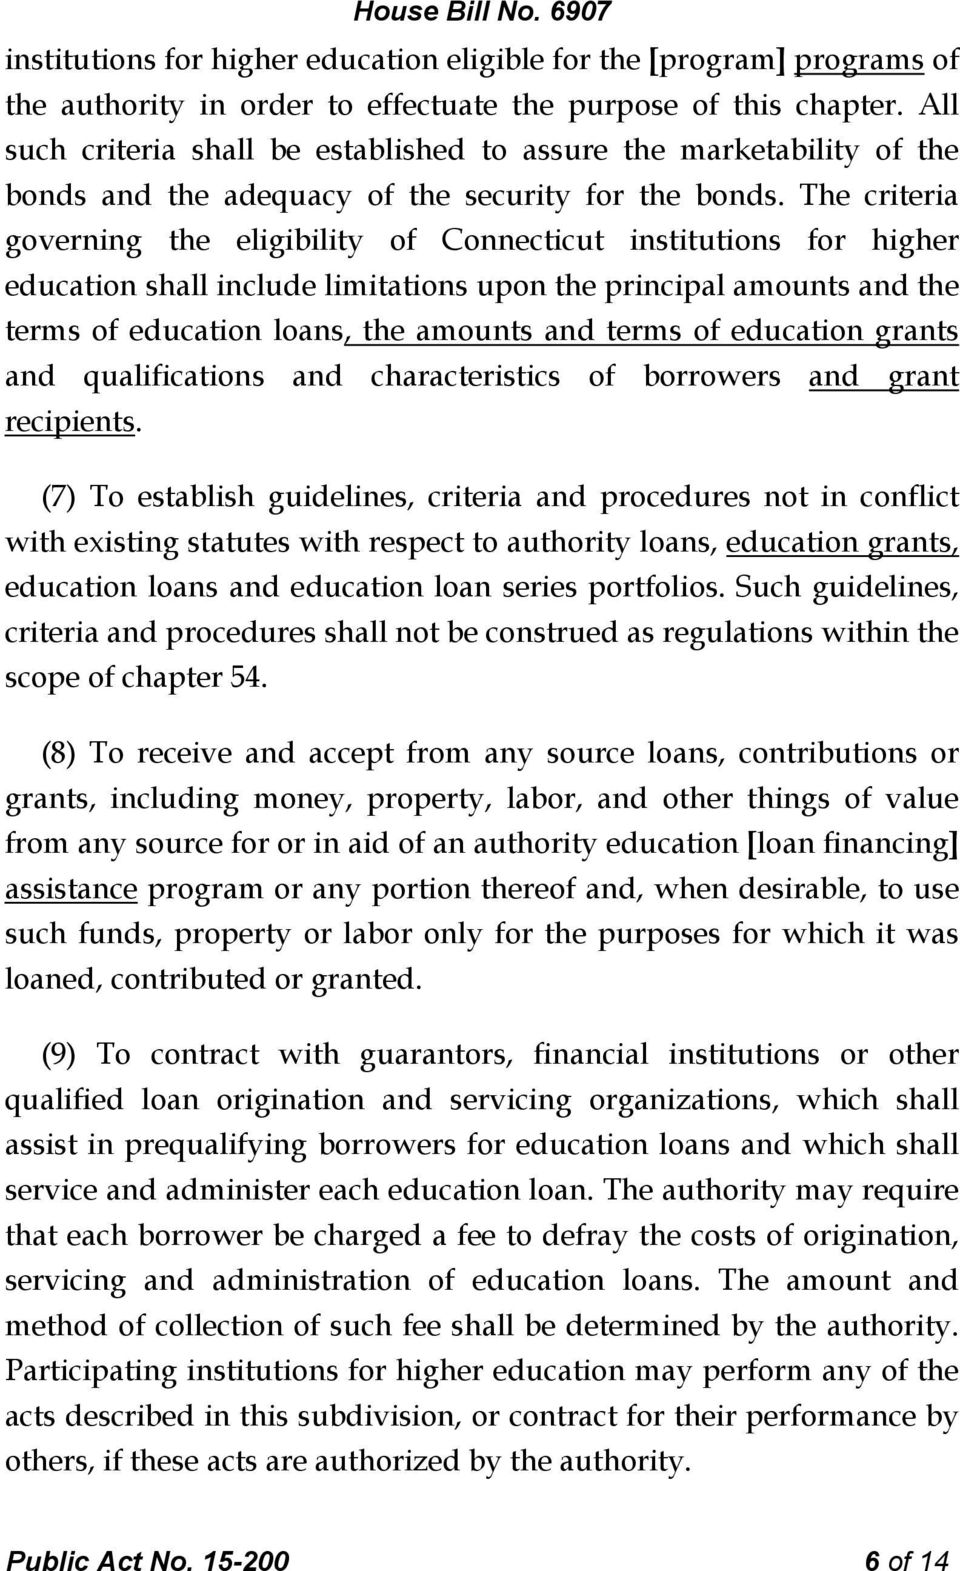 The criteria governing the eligibility of Connecticut institutions for higher education shall include limitations upon the principal amounts and the terms of education loans, the amounts and terms of